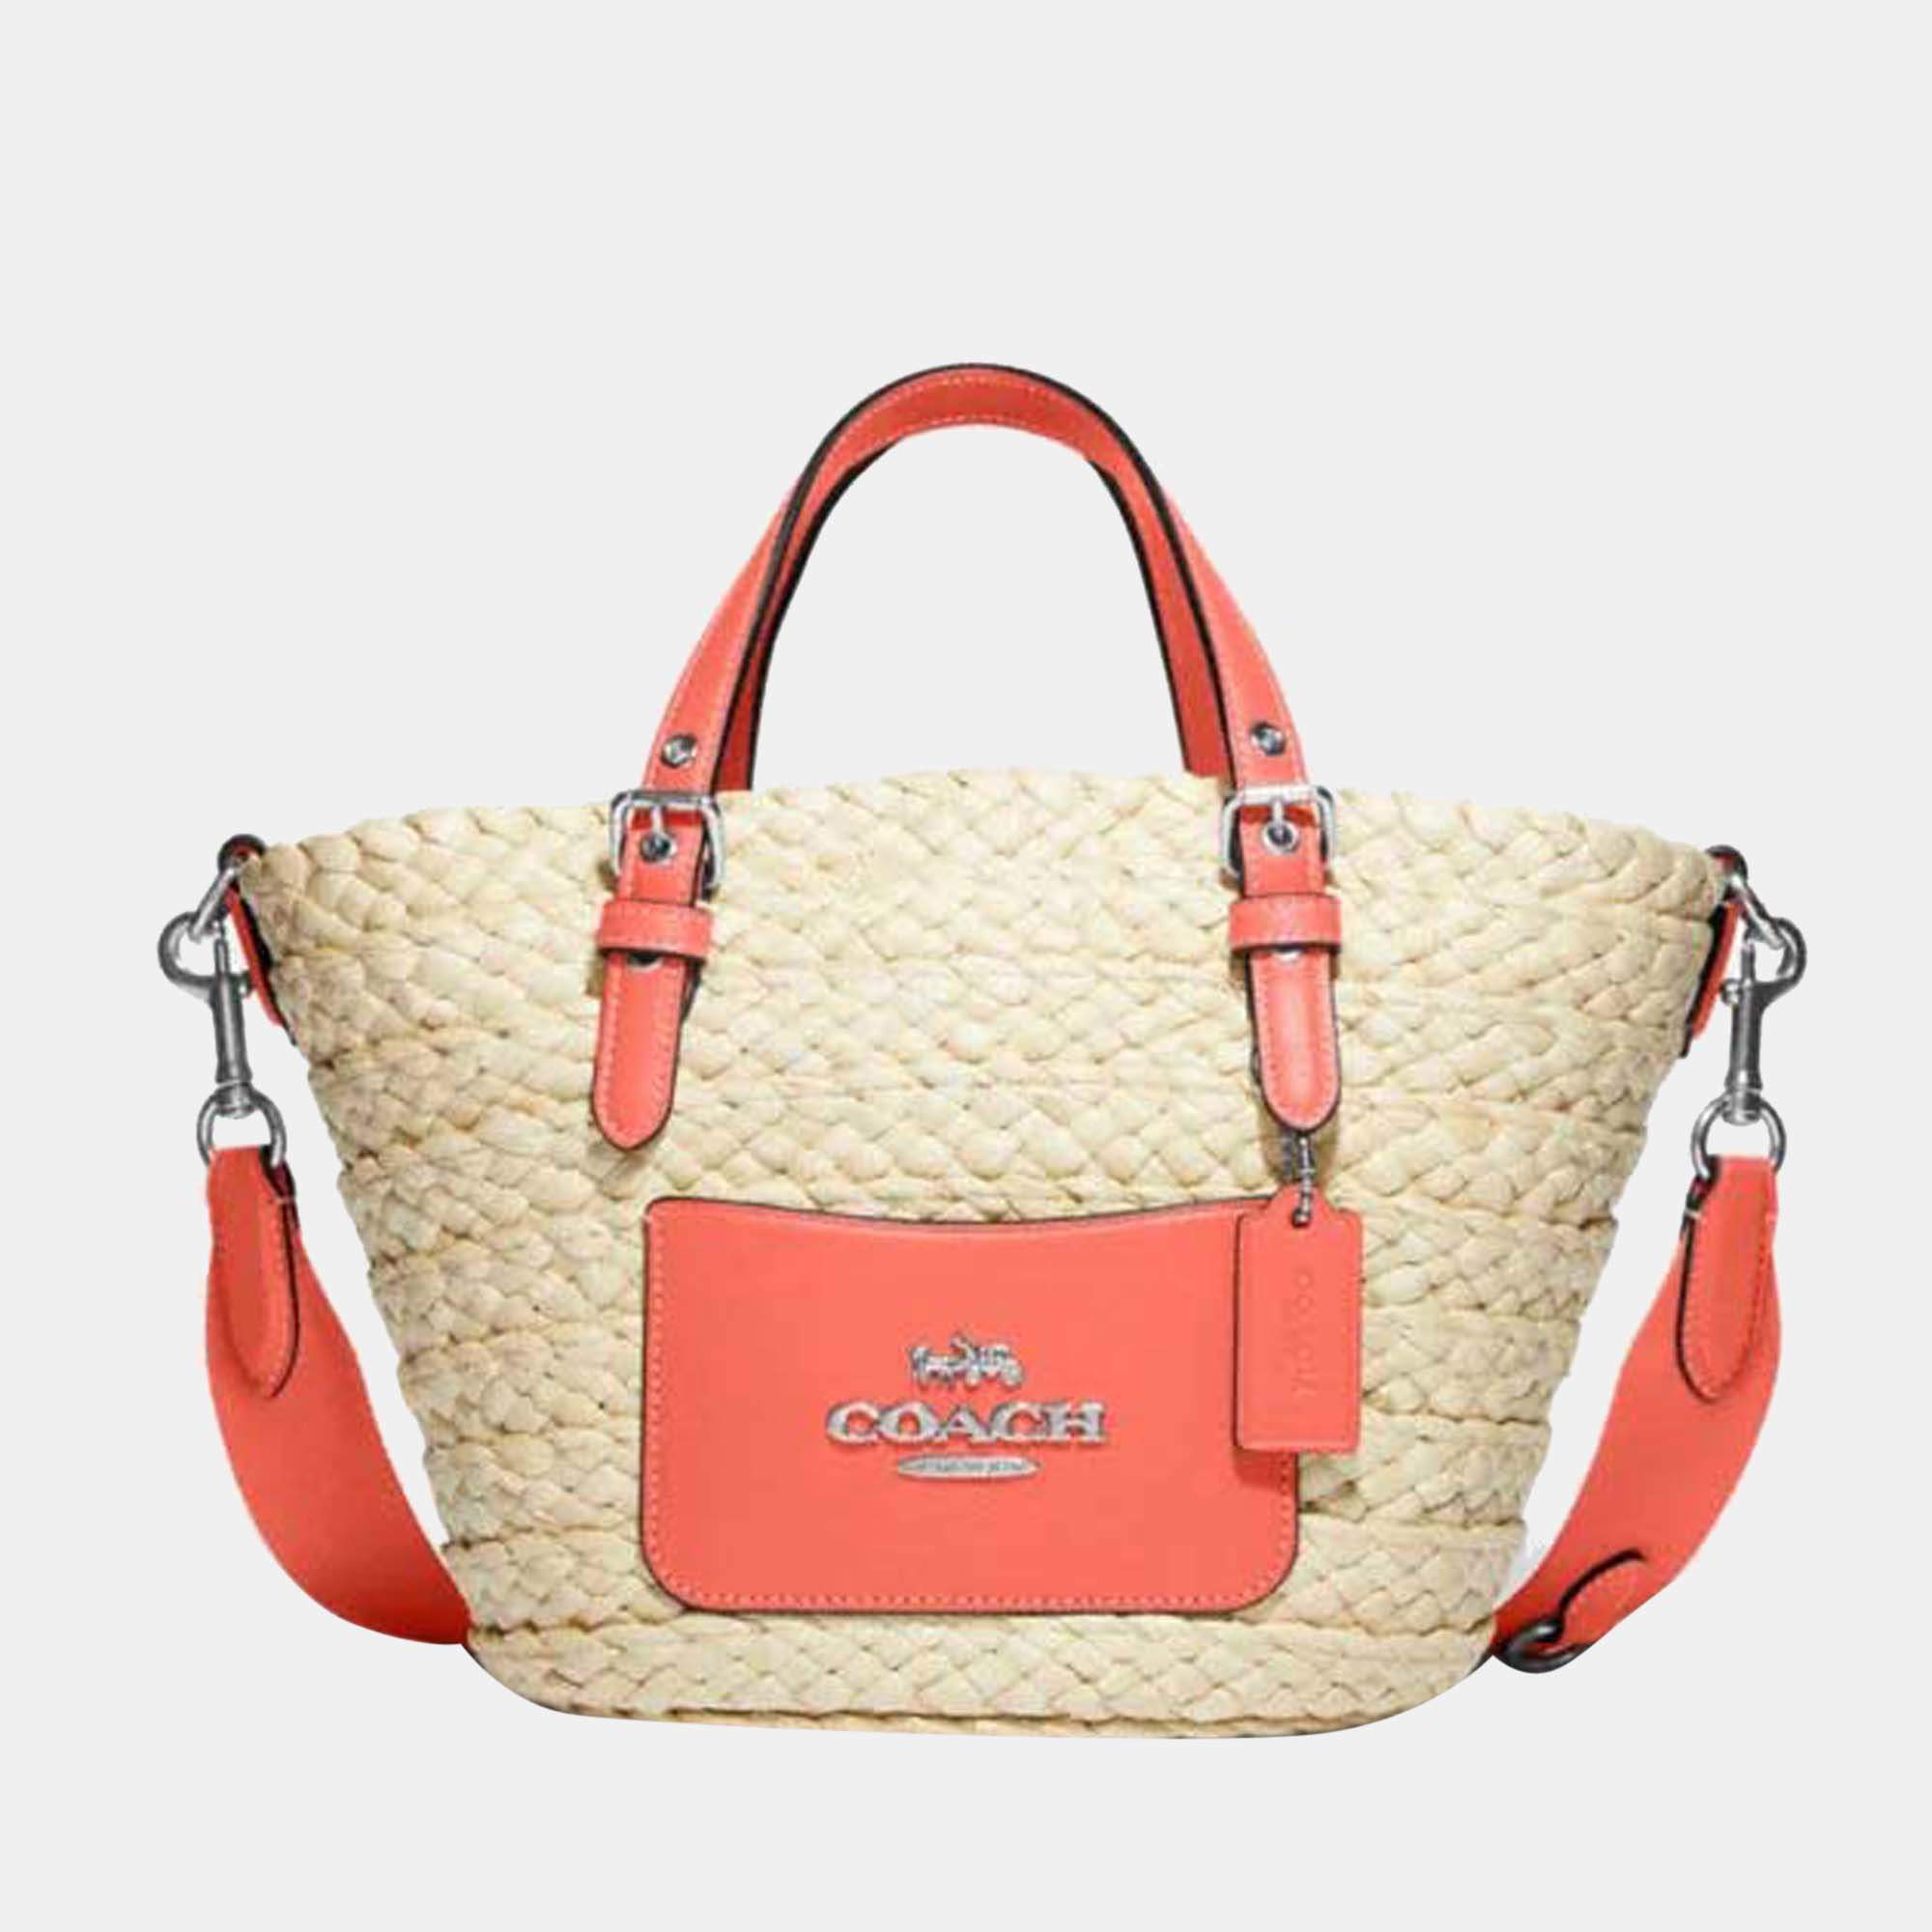 COACH TABBY STRAW BAG AT 50% OFF! FULL REVIEW + HOW TO STYLE - YouTube